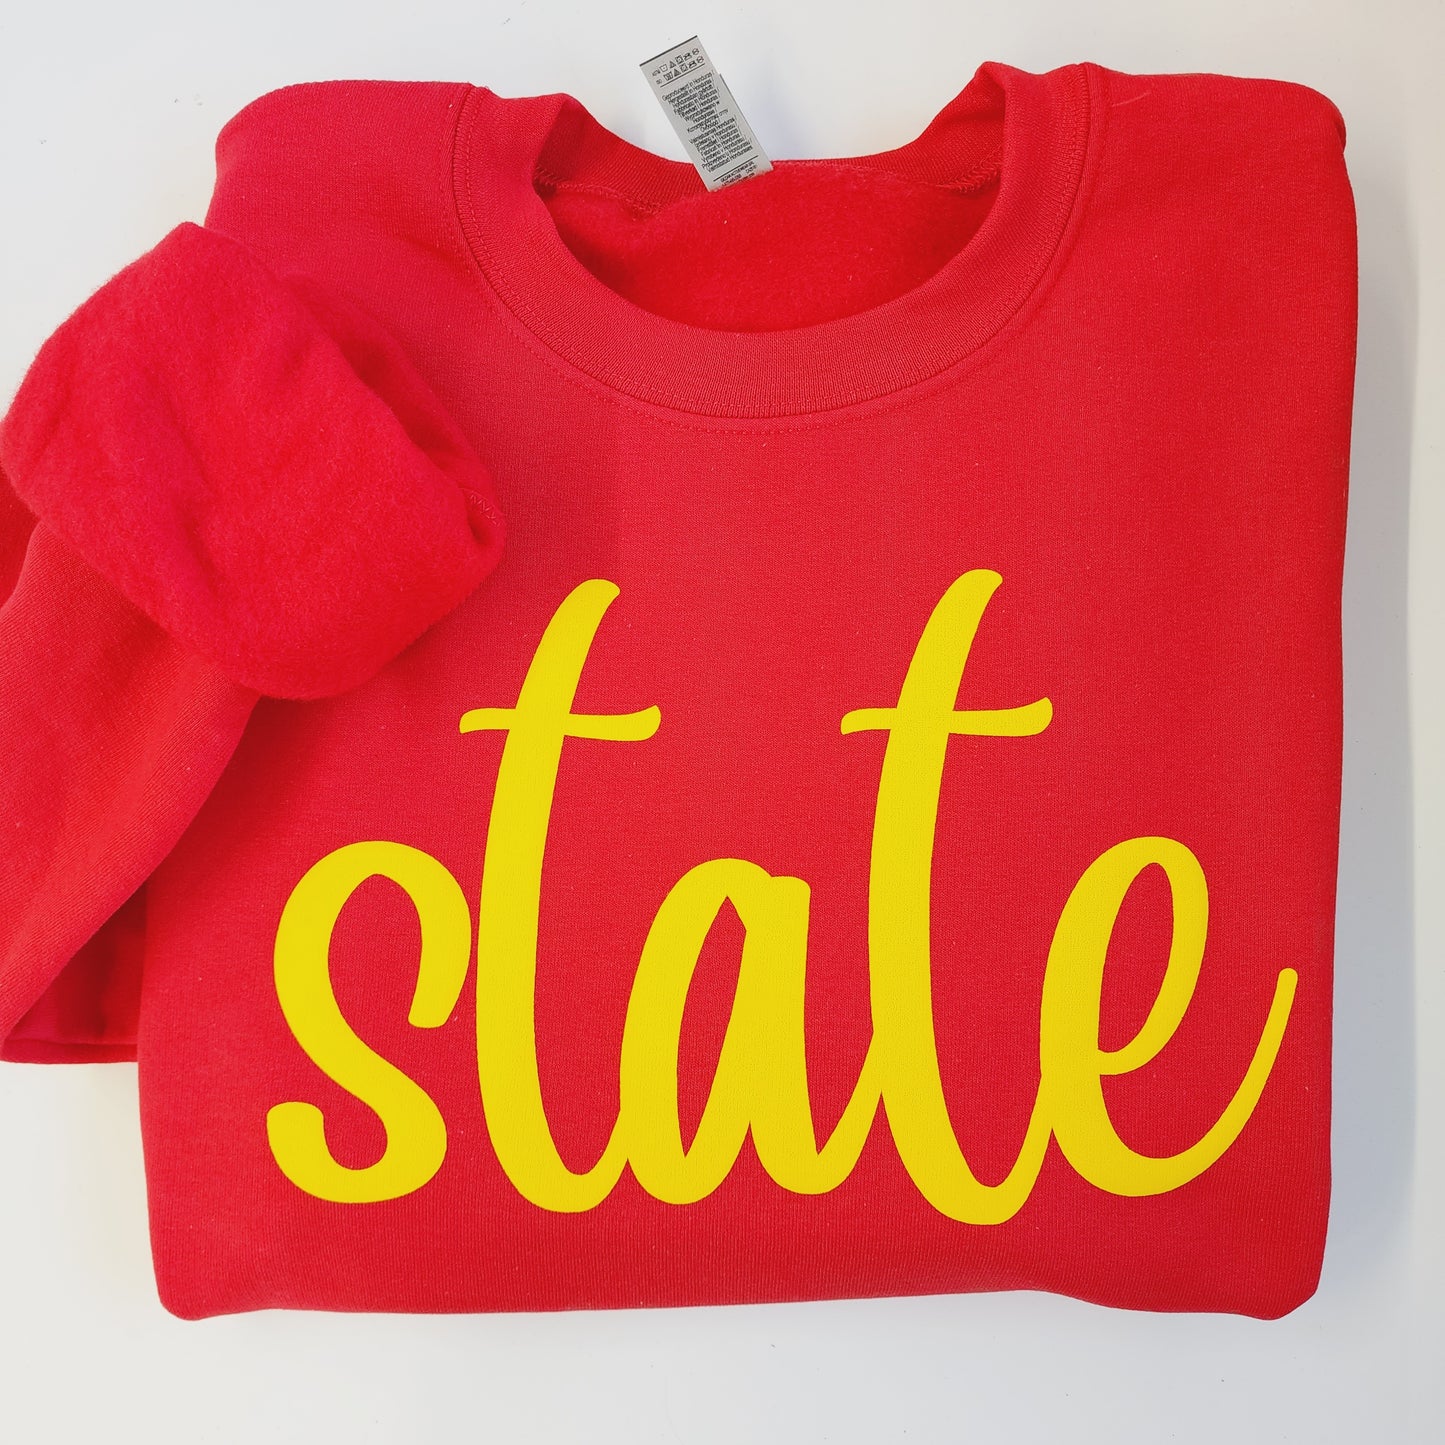 Rowdy in Red- "STATE"